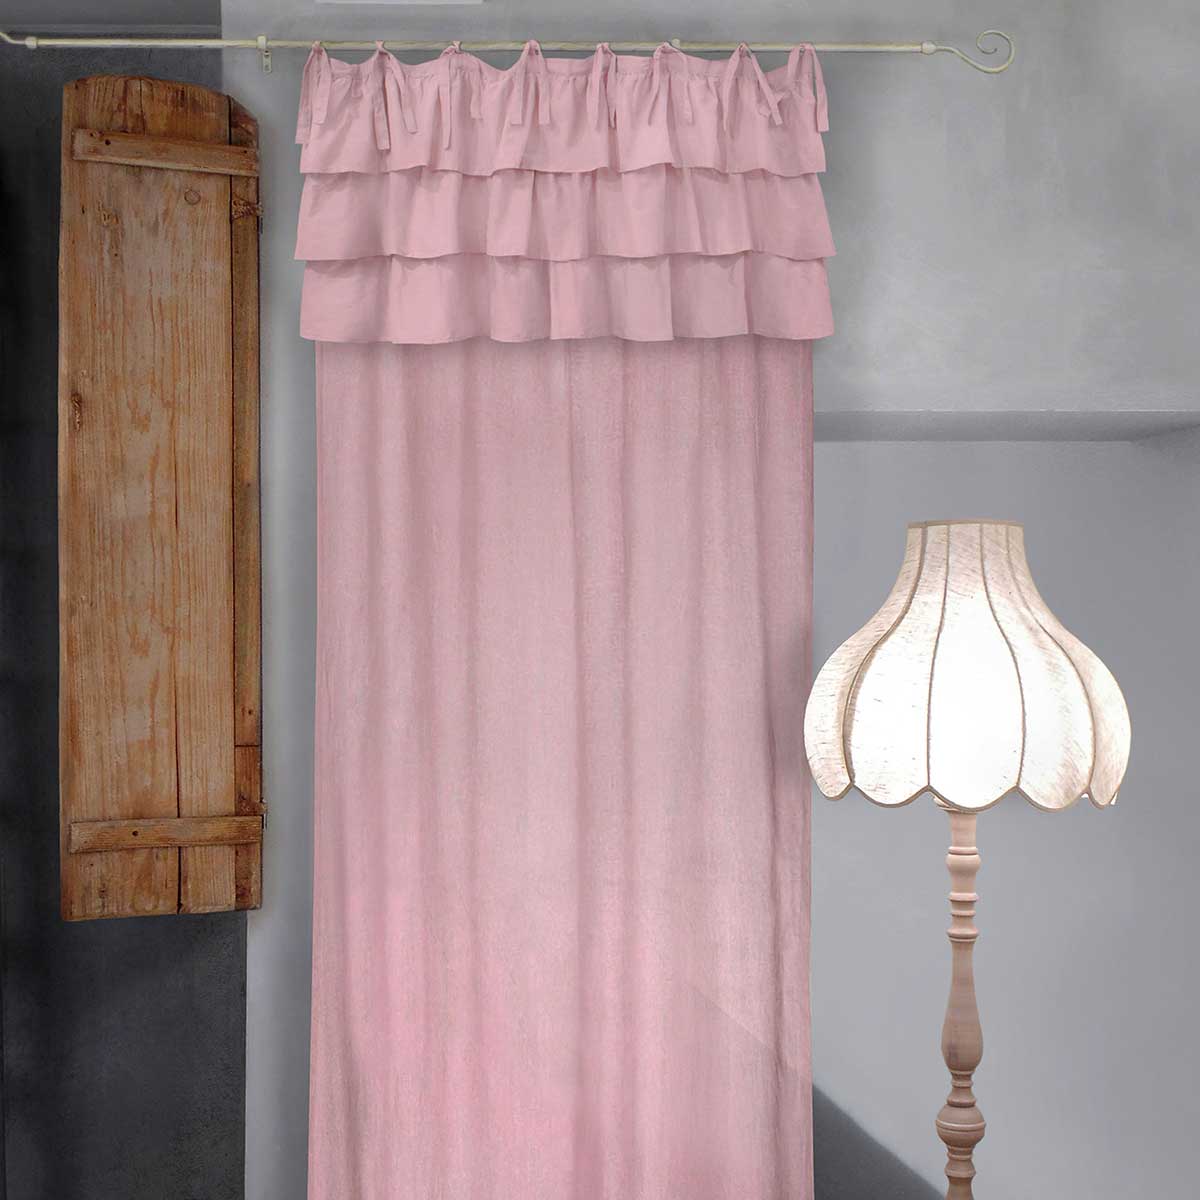 Shabby Chic Etoile Collection Vorhang mit Volants 140 x 290 cm Rosa Farbe